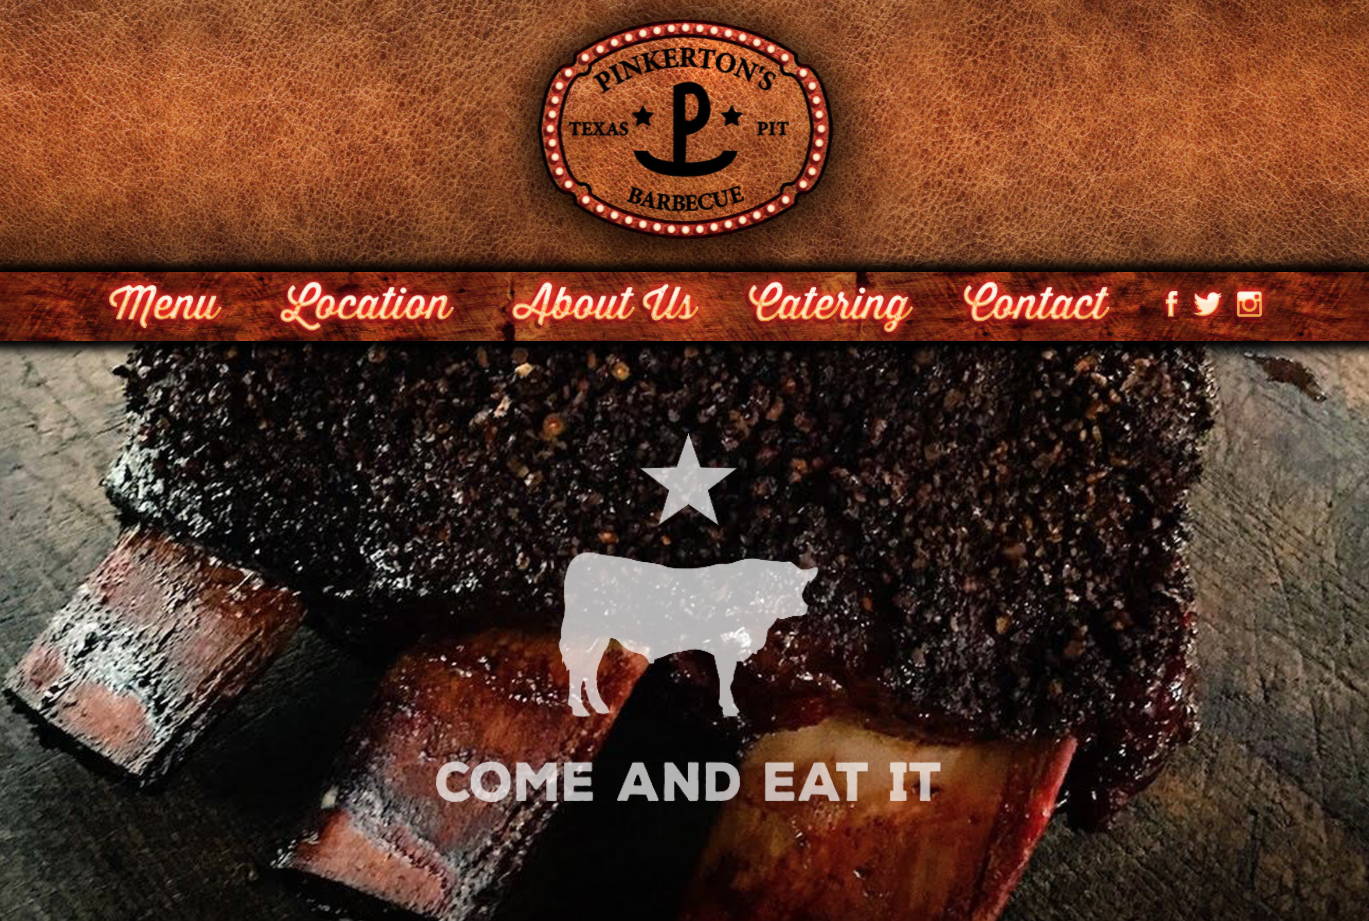 Pinkerton’s Barbecue Website Launches Image